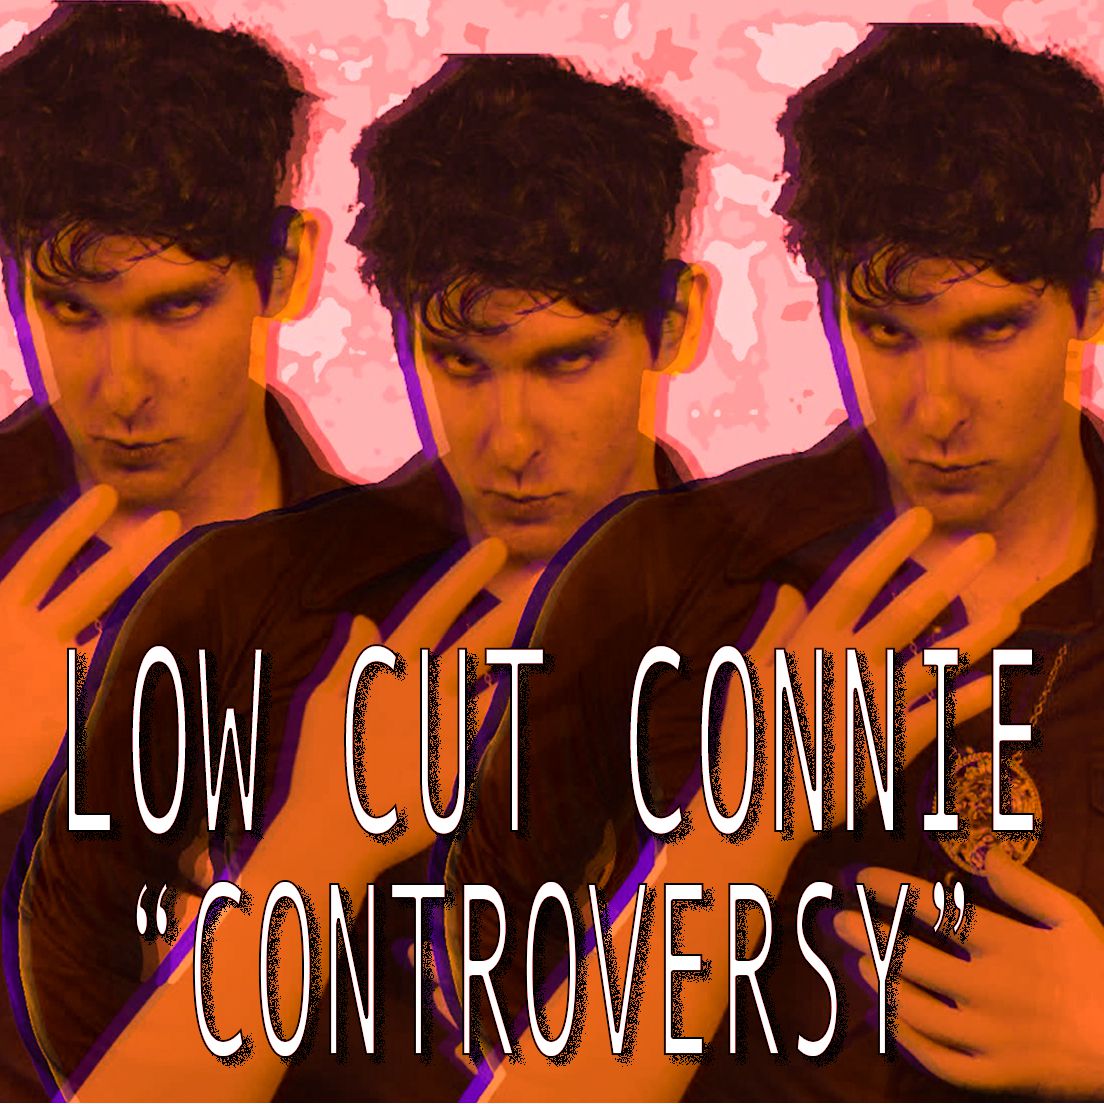 controvery cover photo square Low Cut Connie pay tribute to Prince with a cover of Controversy    listen